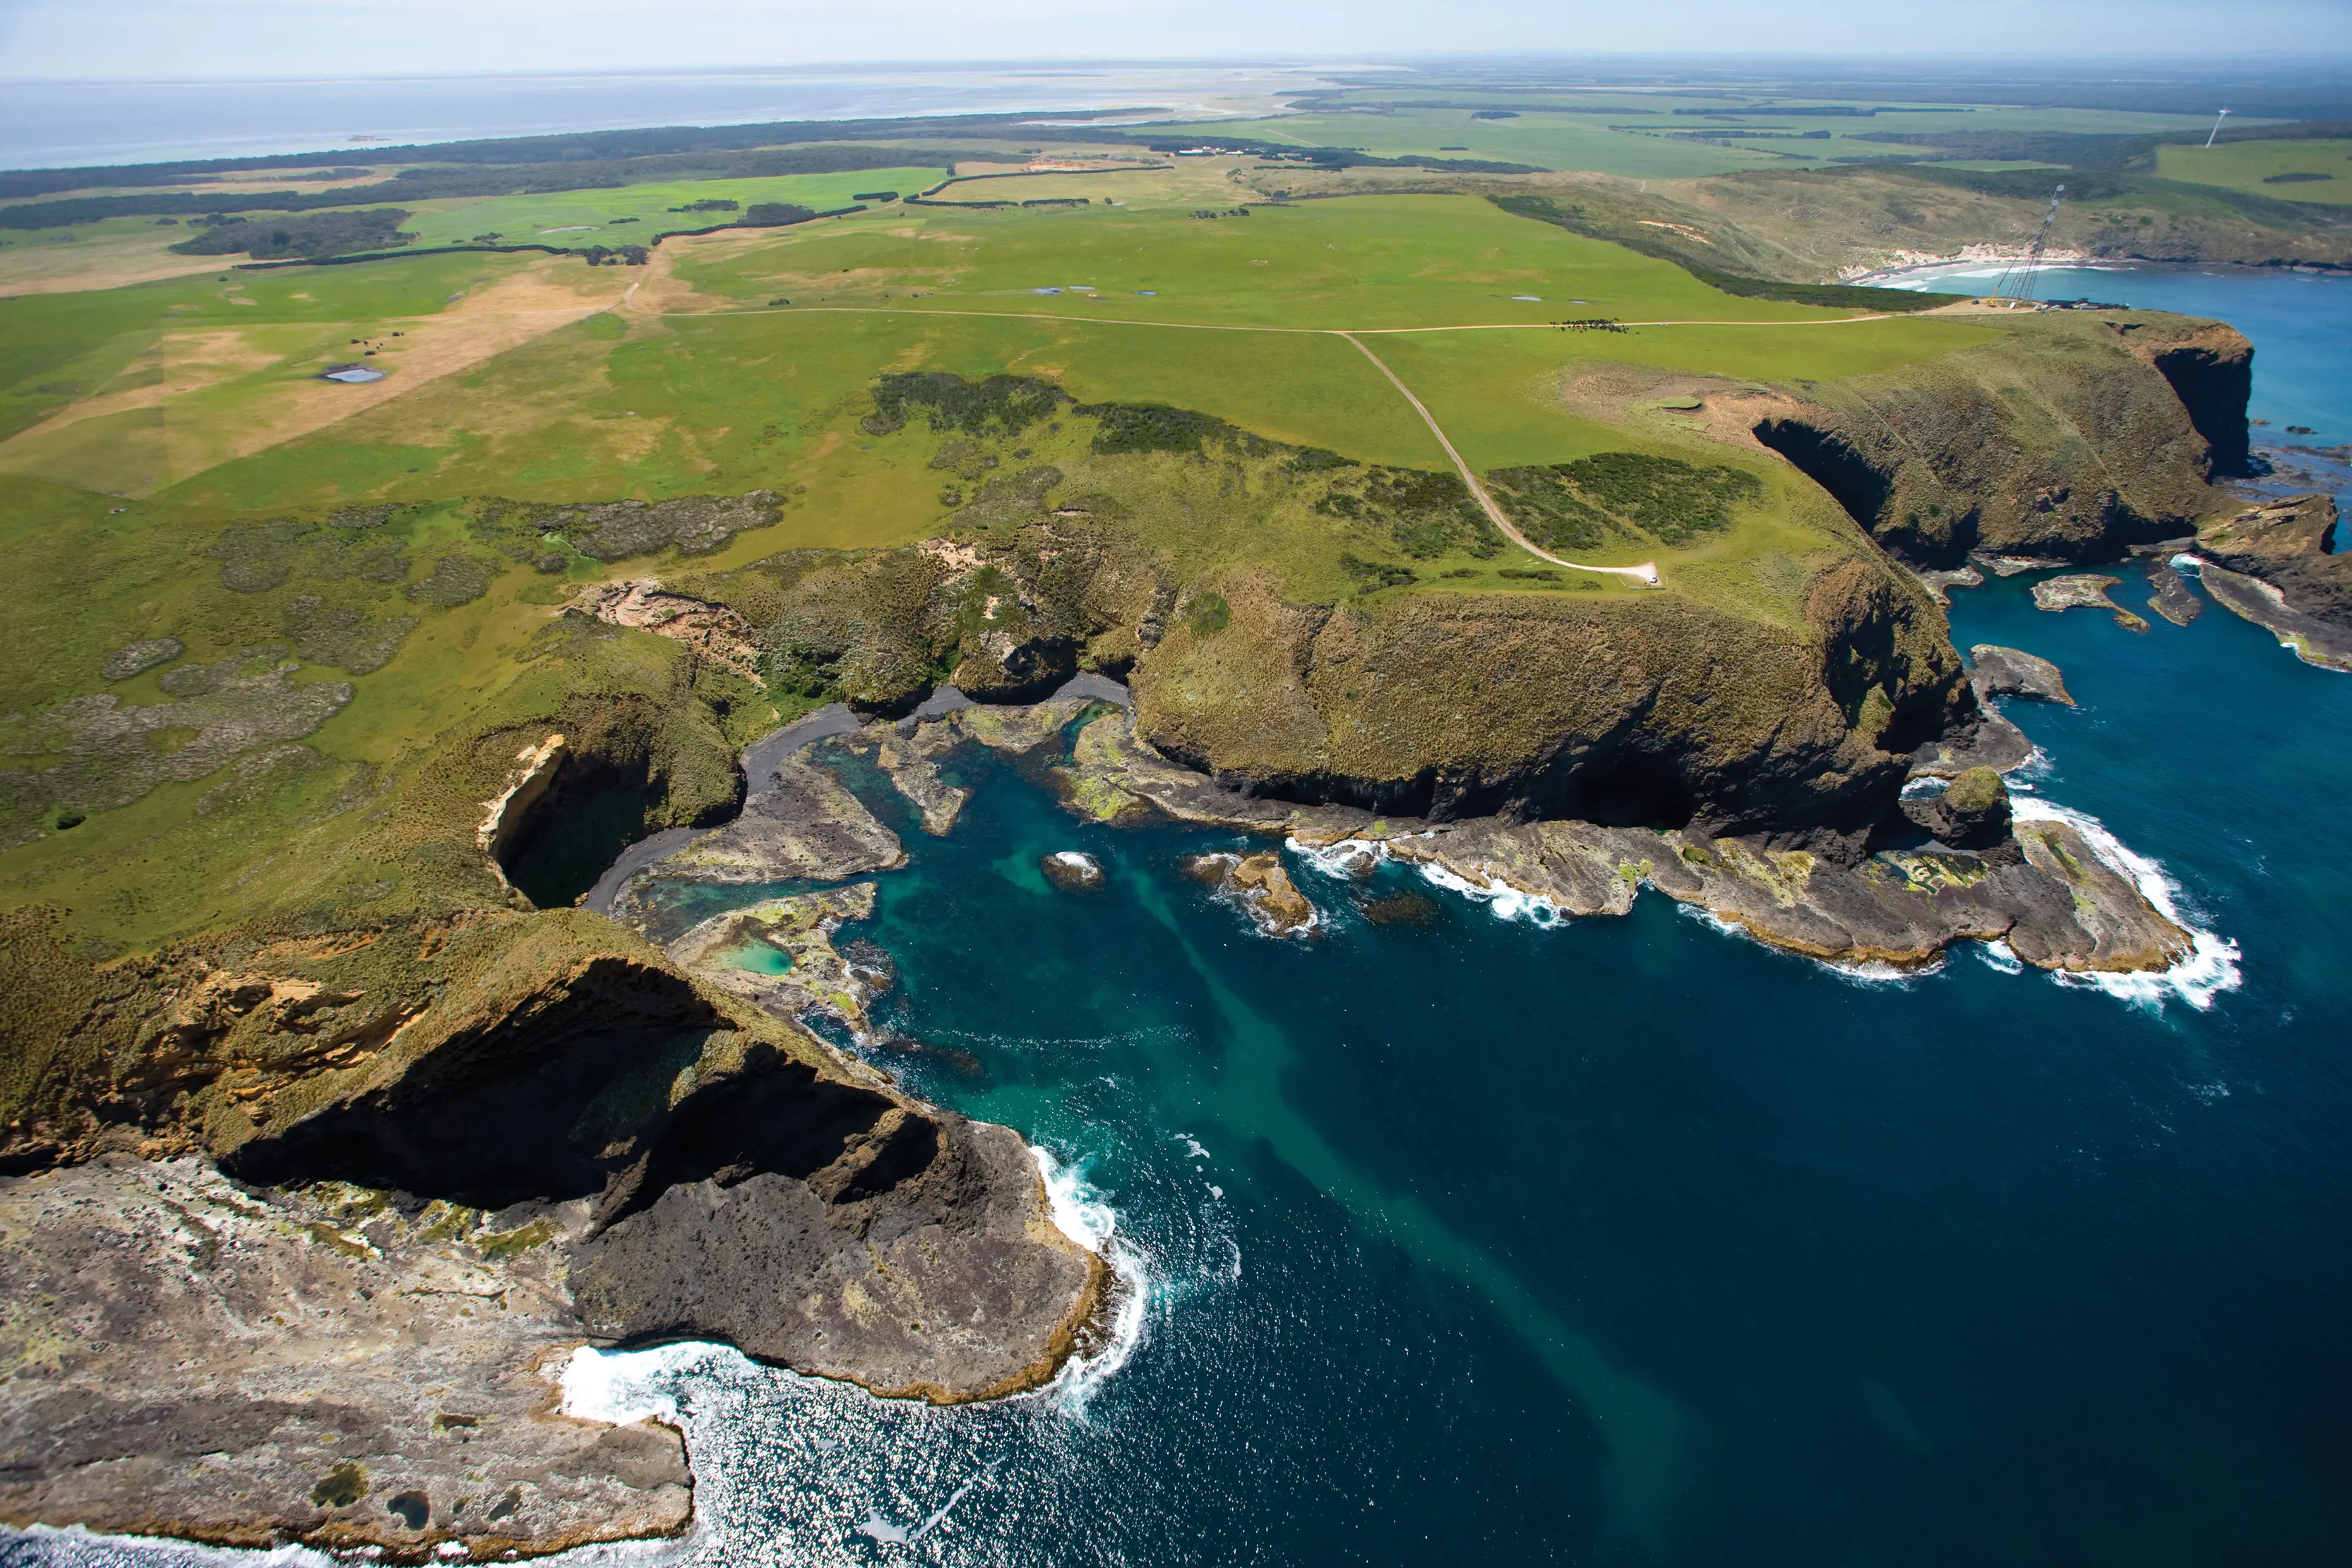 Spectacular aerial image of Kennaook / Cape Grim, Woolnorth. Lush green grassland roll to the cliffside to meet with pristine blue ocean.